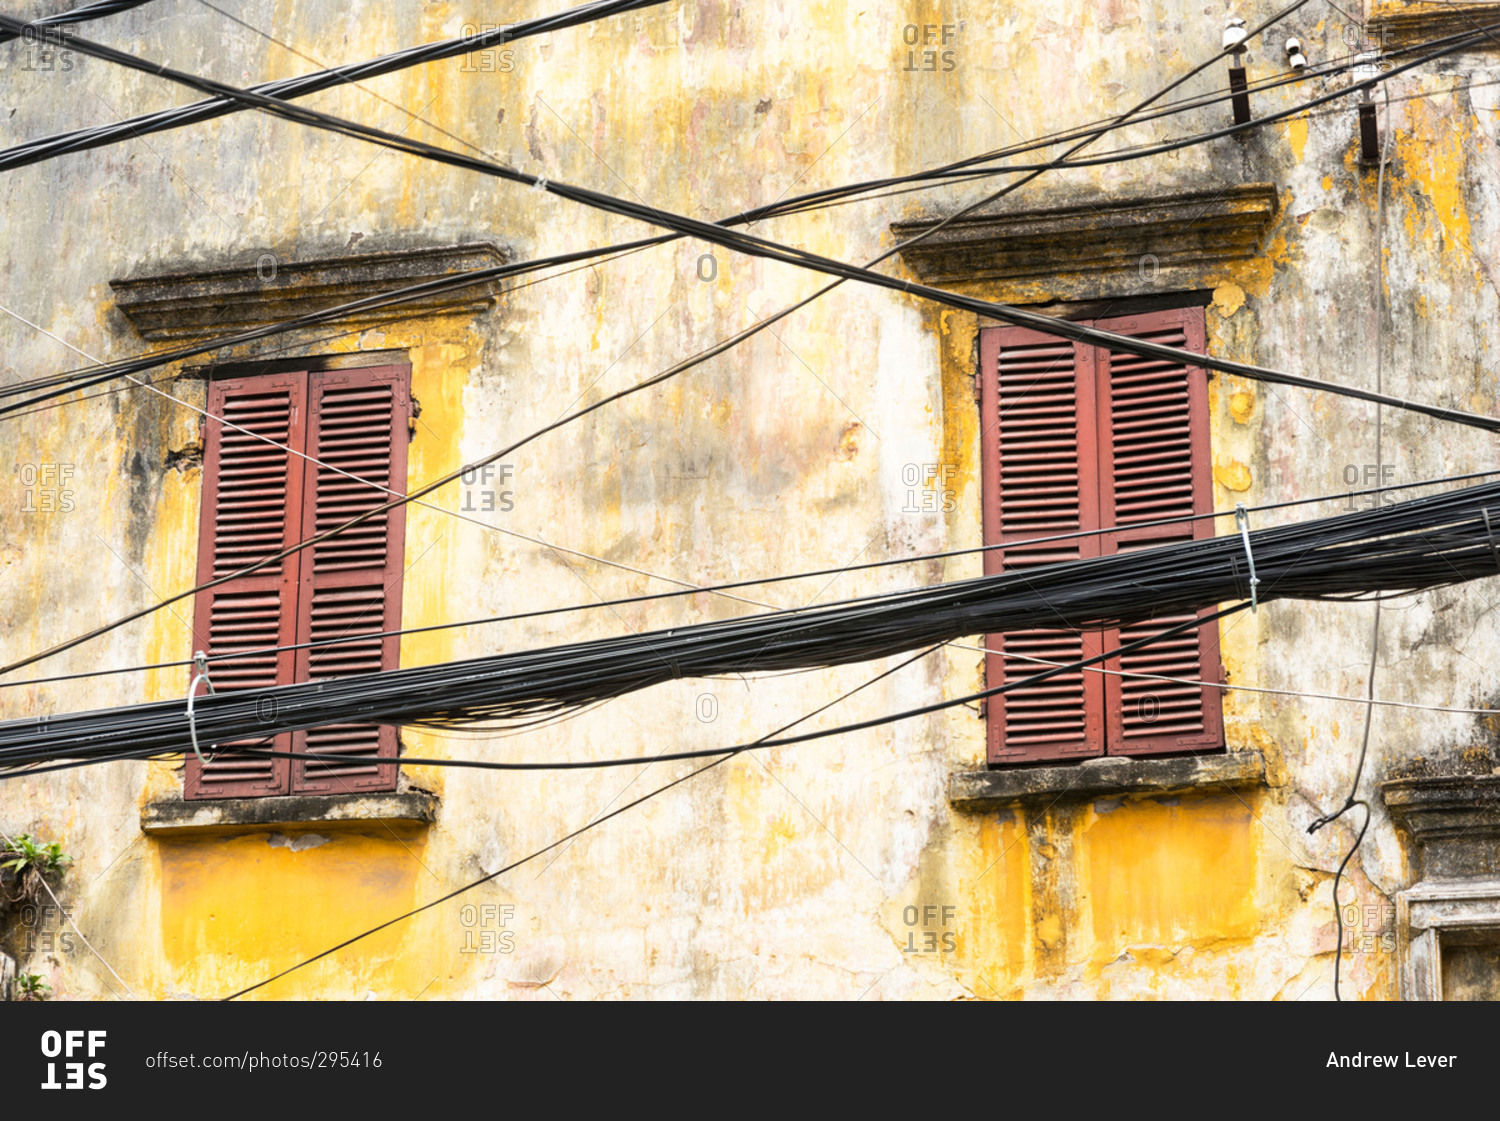 An old yellow building with two windows with brown shutters with a chaotic collection of cables in the foreground in the city of Hanoi, Vietnam